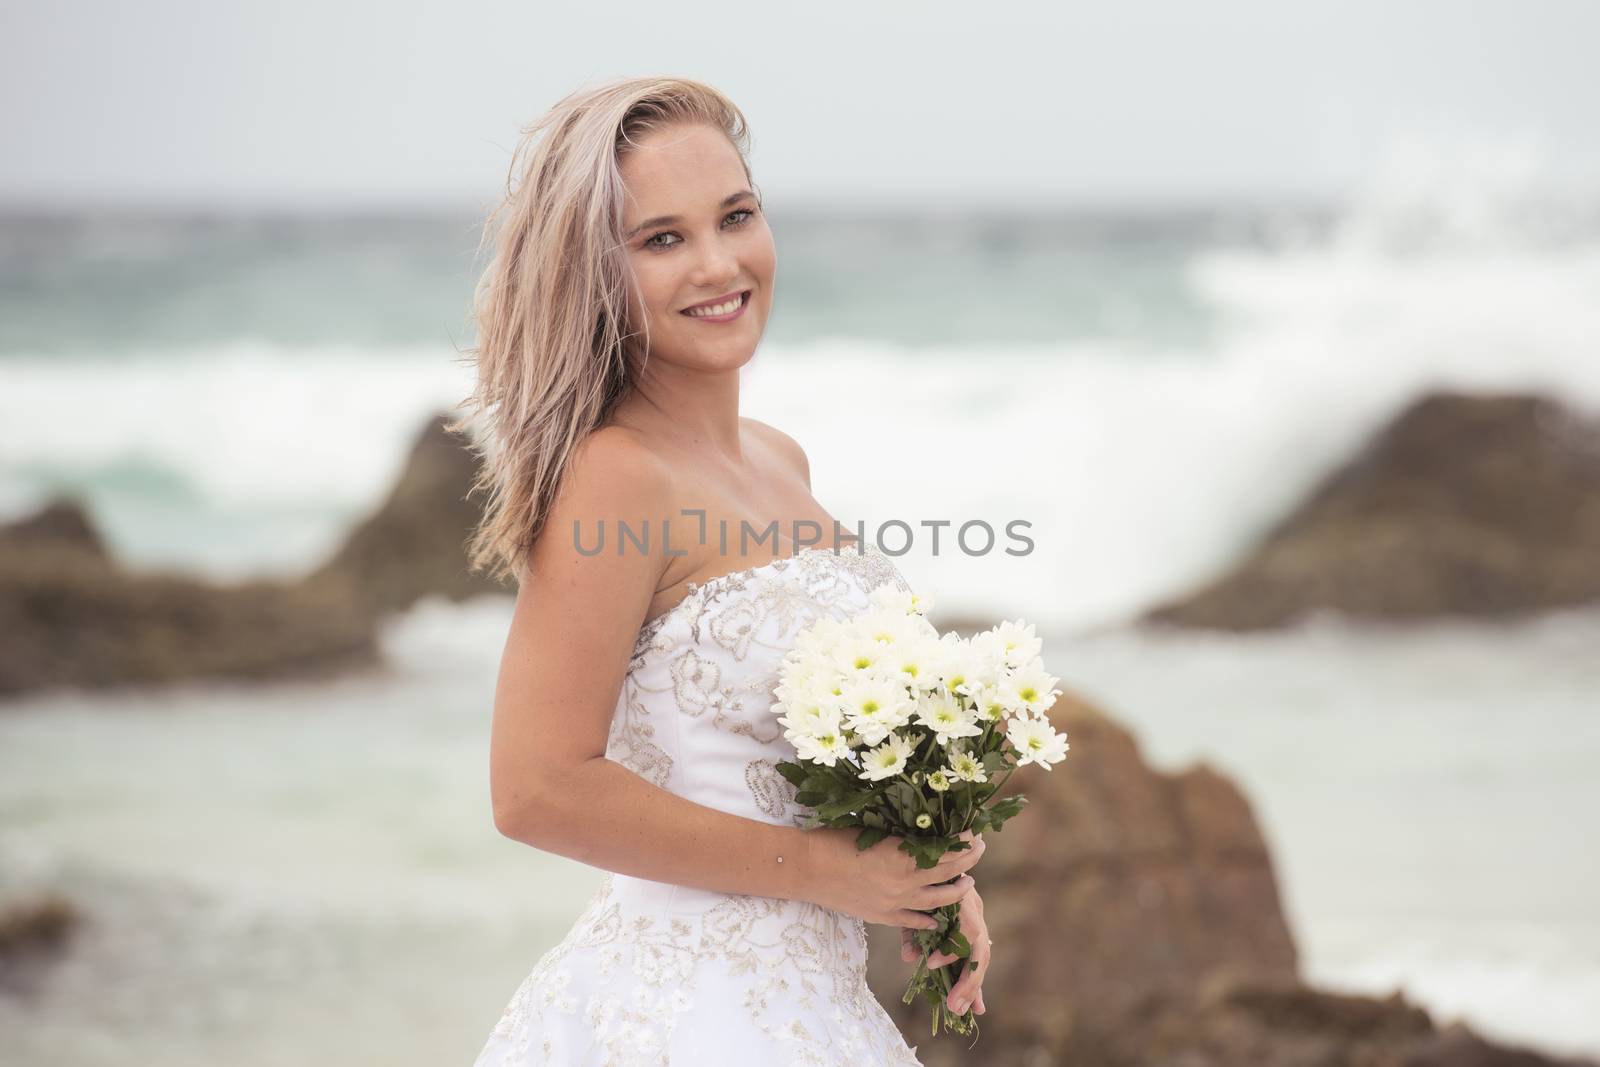 Bride at Snapper Rock beach in New South Wales. by artistrobd